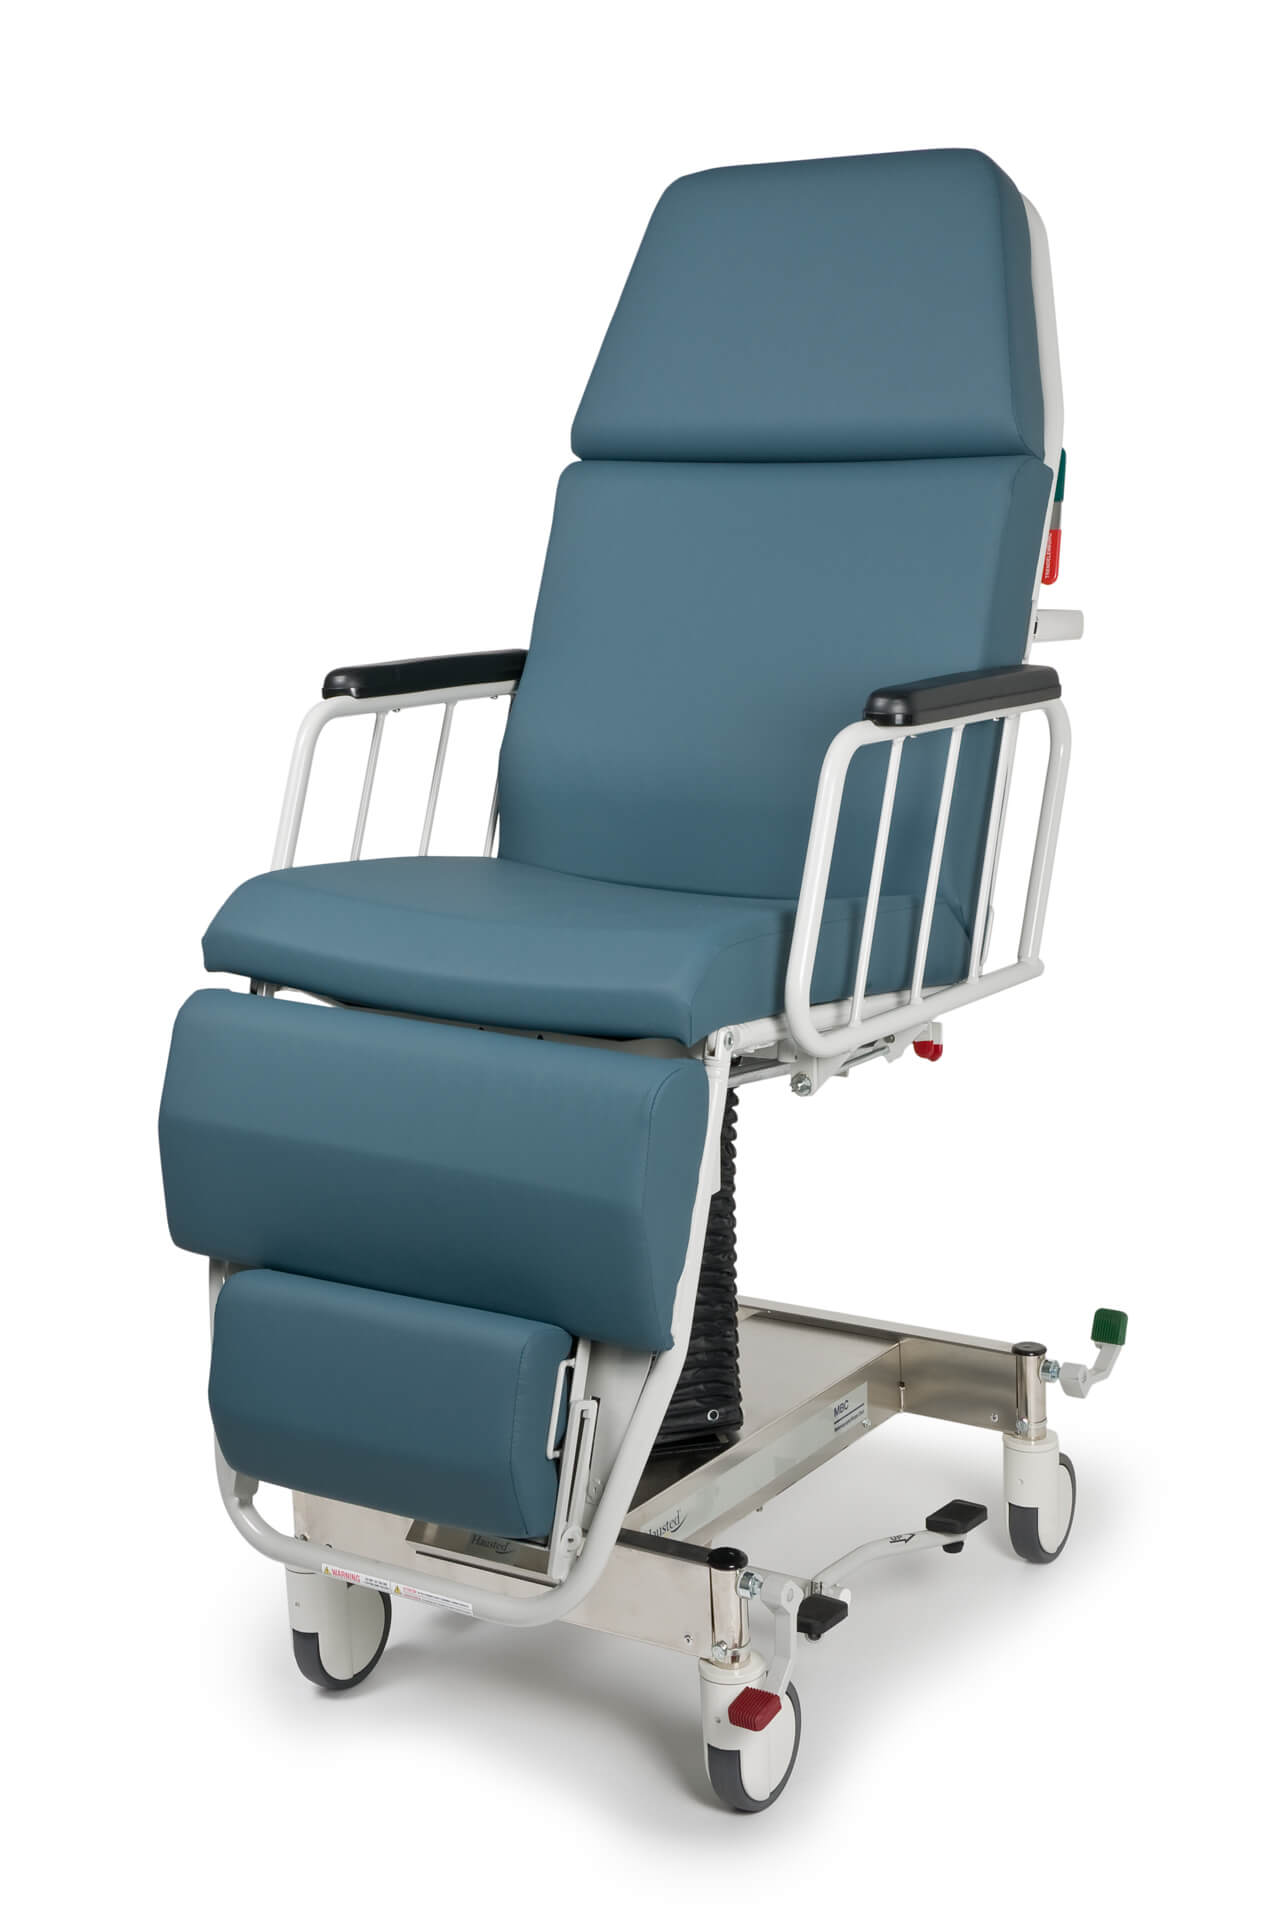 Hausted Mammography Biopsy Chair